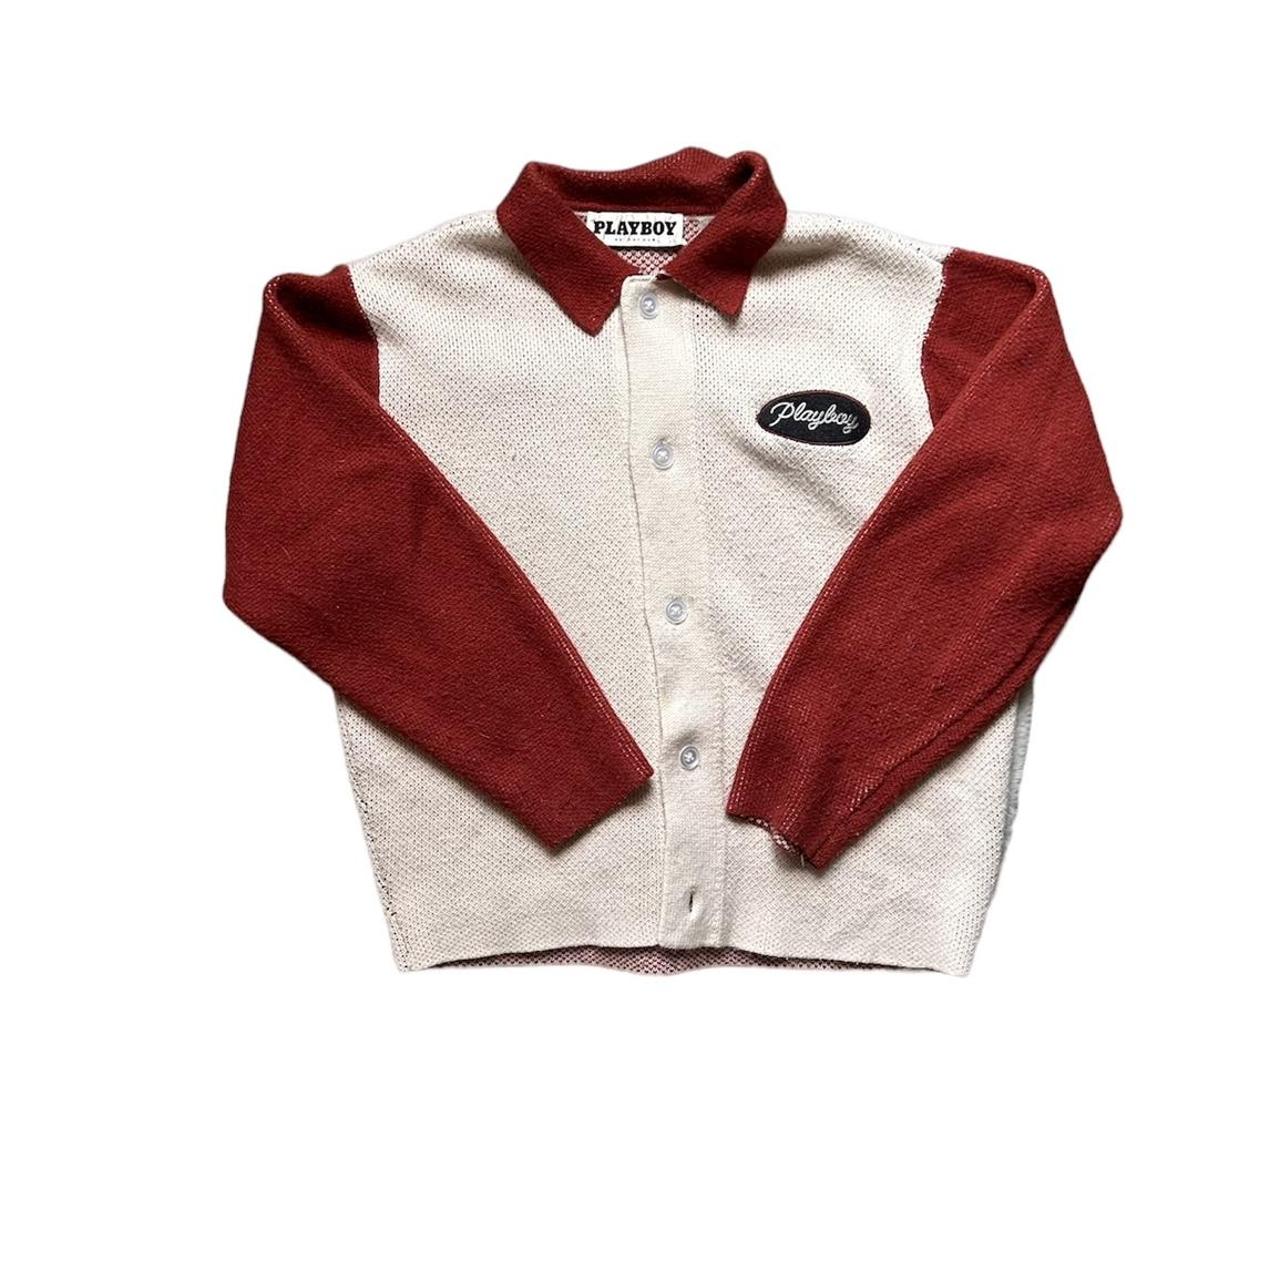 PacSun Men's Red and Cream Cardigan